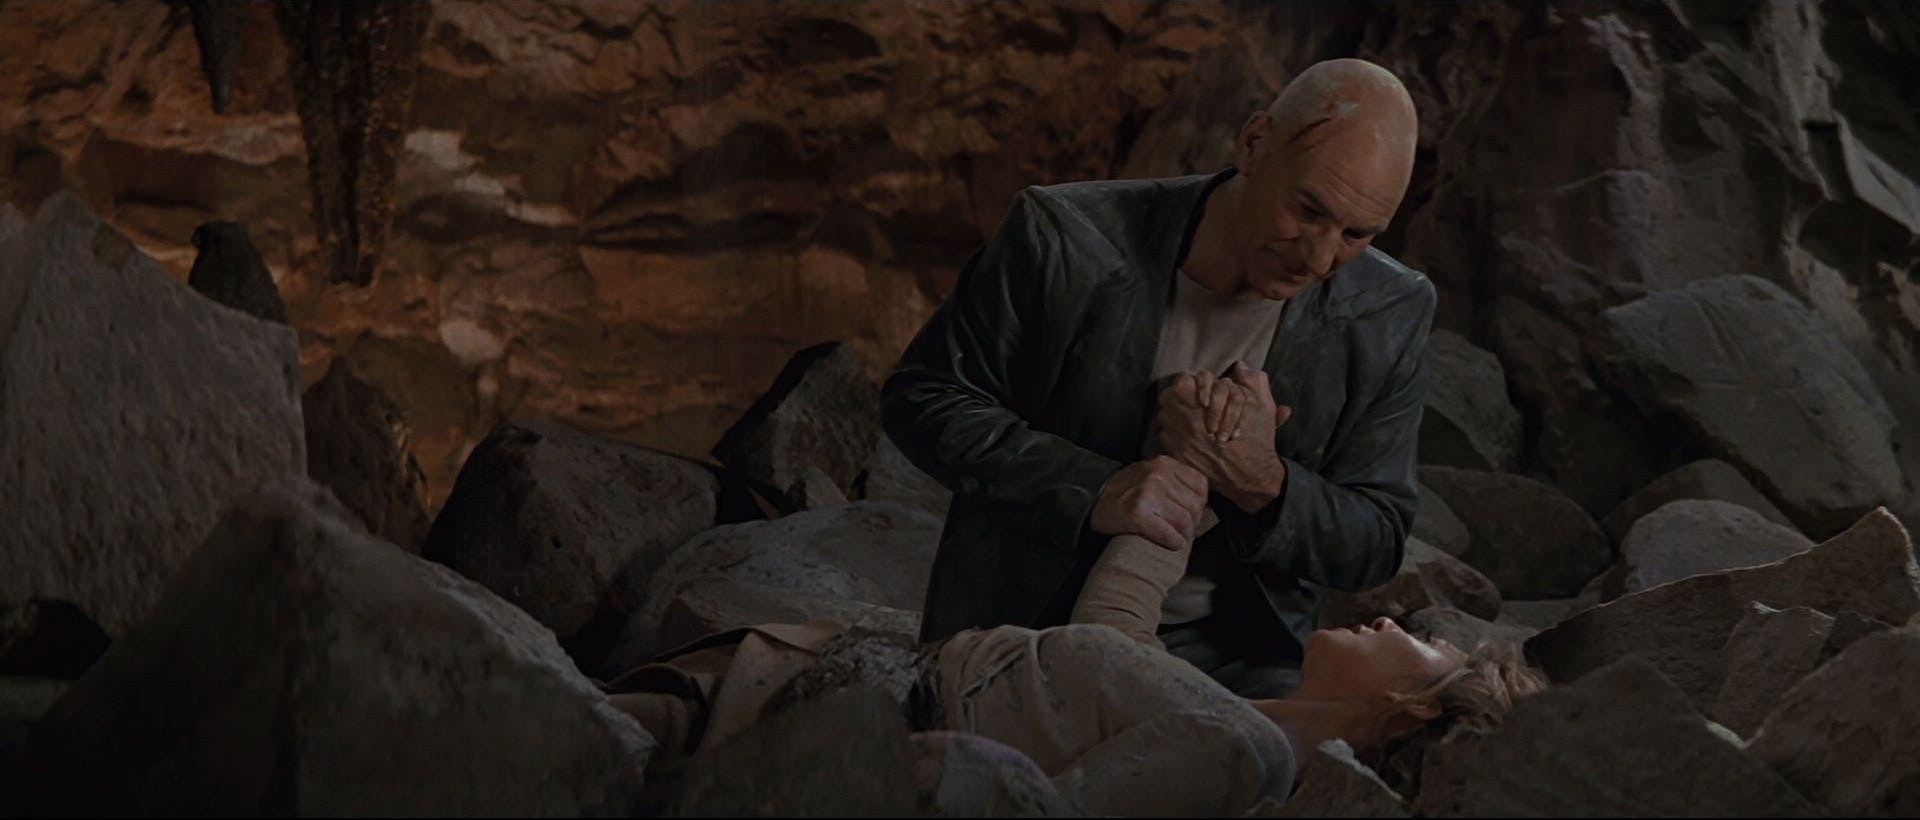 Struggling to keep Anij alive, as she's crushed under the cavern rubble, Picard holds her hand asking her to stay in the moment with him in Star Trek: Insurrection